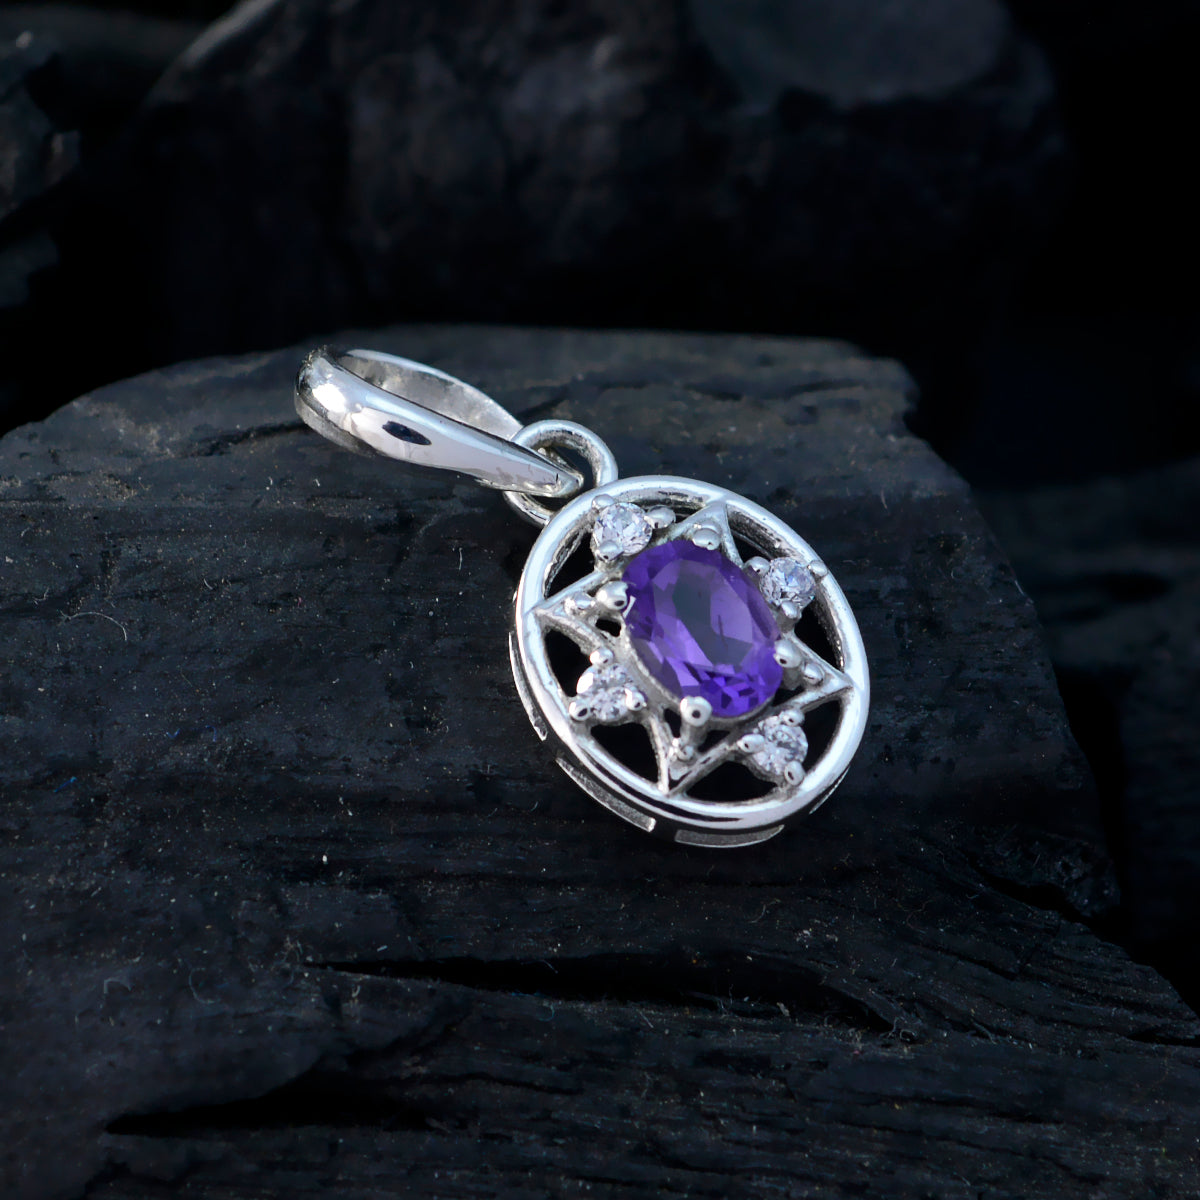 Riyo Tasty Gems Oval Faceted Purple Amethyst Silver Pendant Gift For Engagement